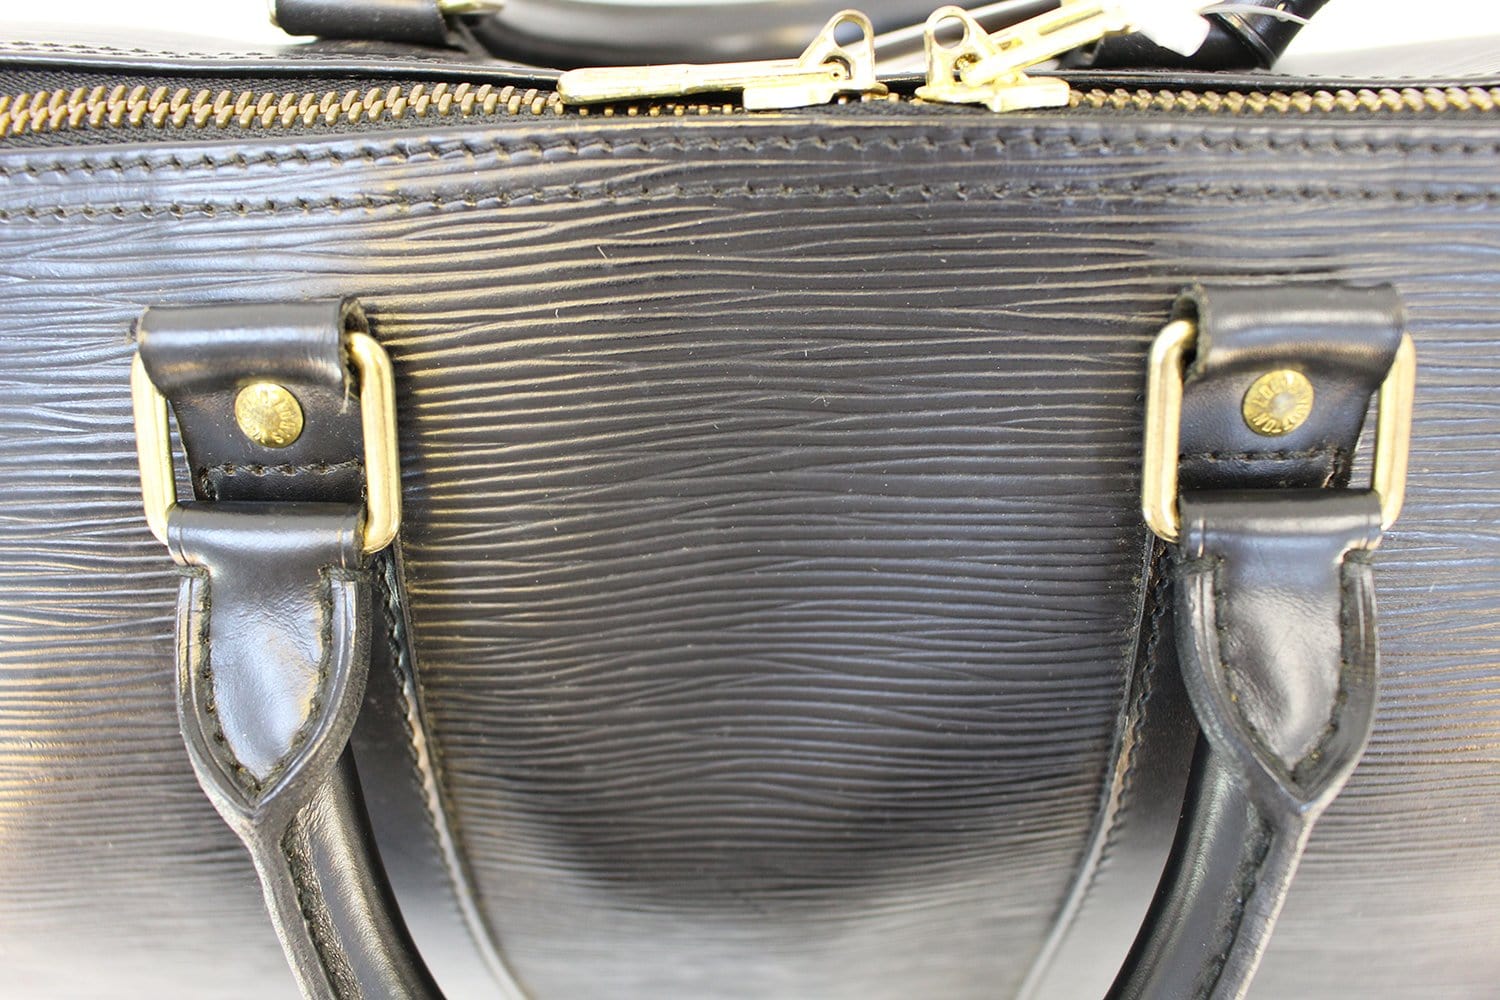 Sold at Auction: LOUIS VUITTON 'KEEPALL' 45 BLACK EPI LEATHER BAG